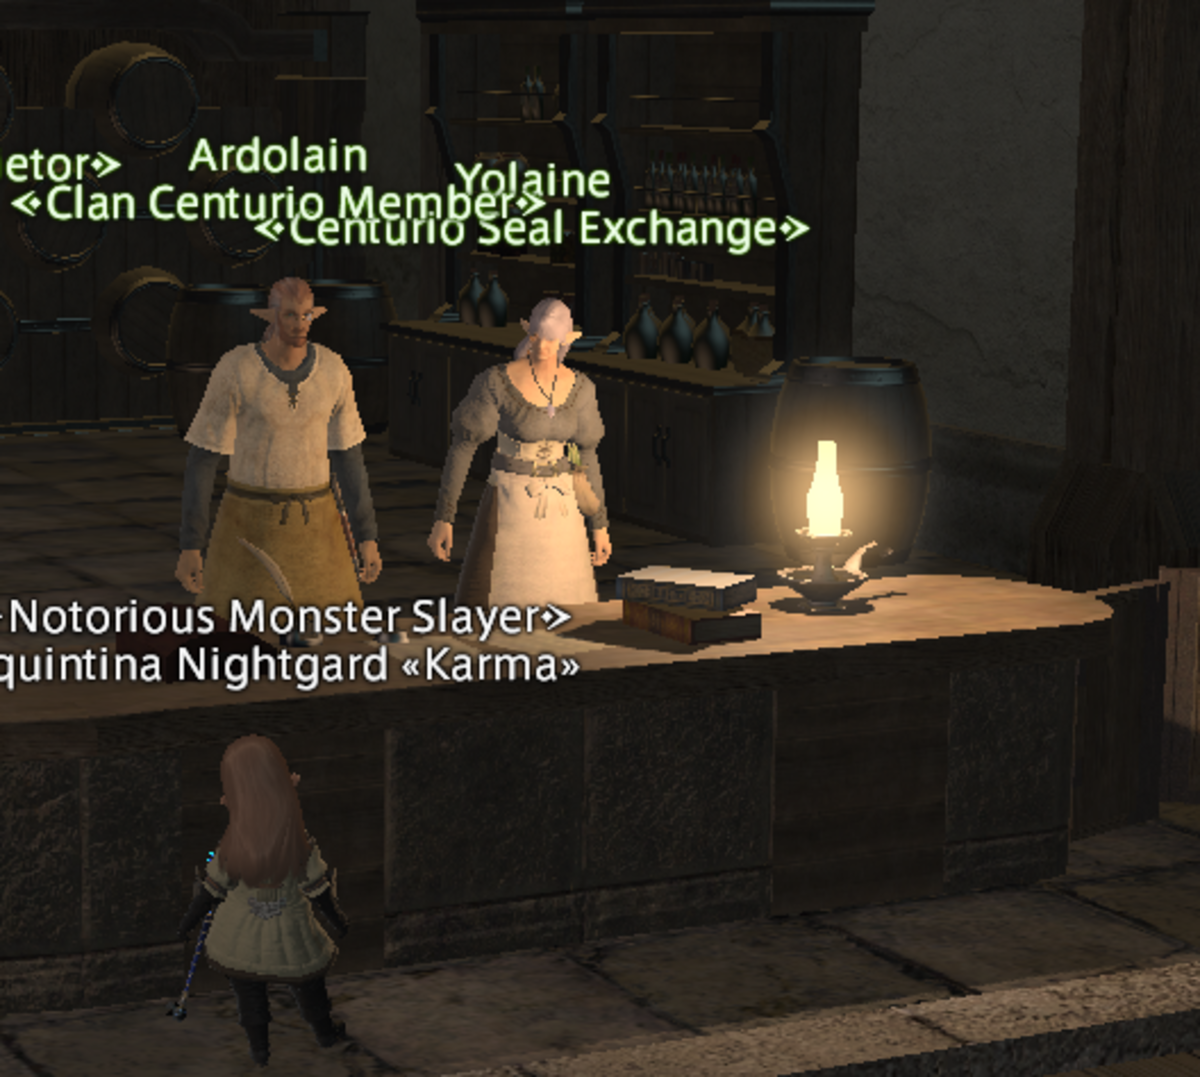 ff14-how-to-get-centurio-seals-and-what-are-they-used-for